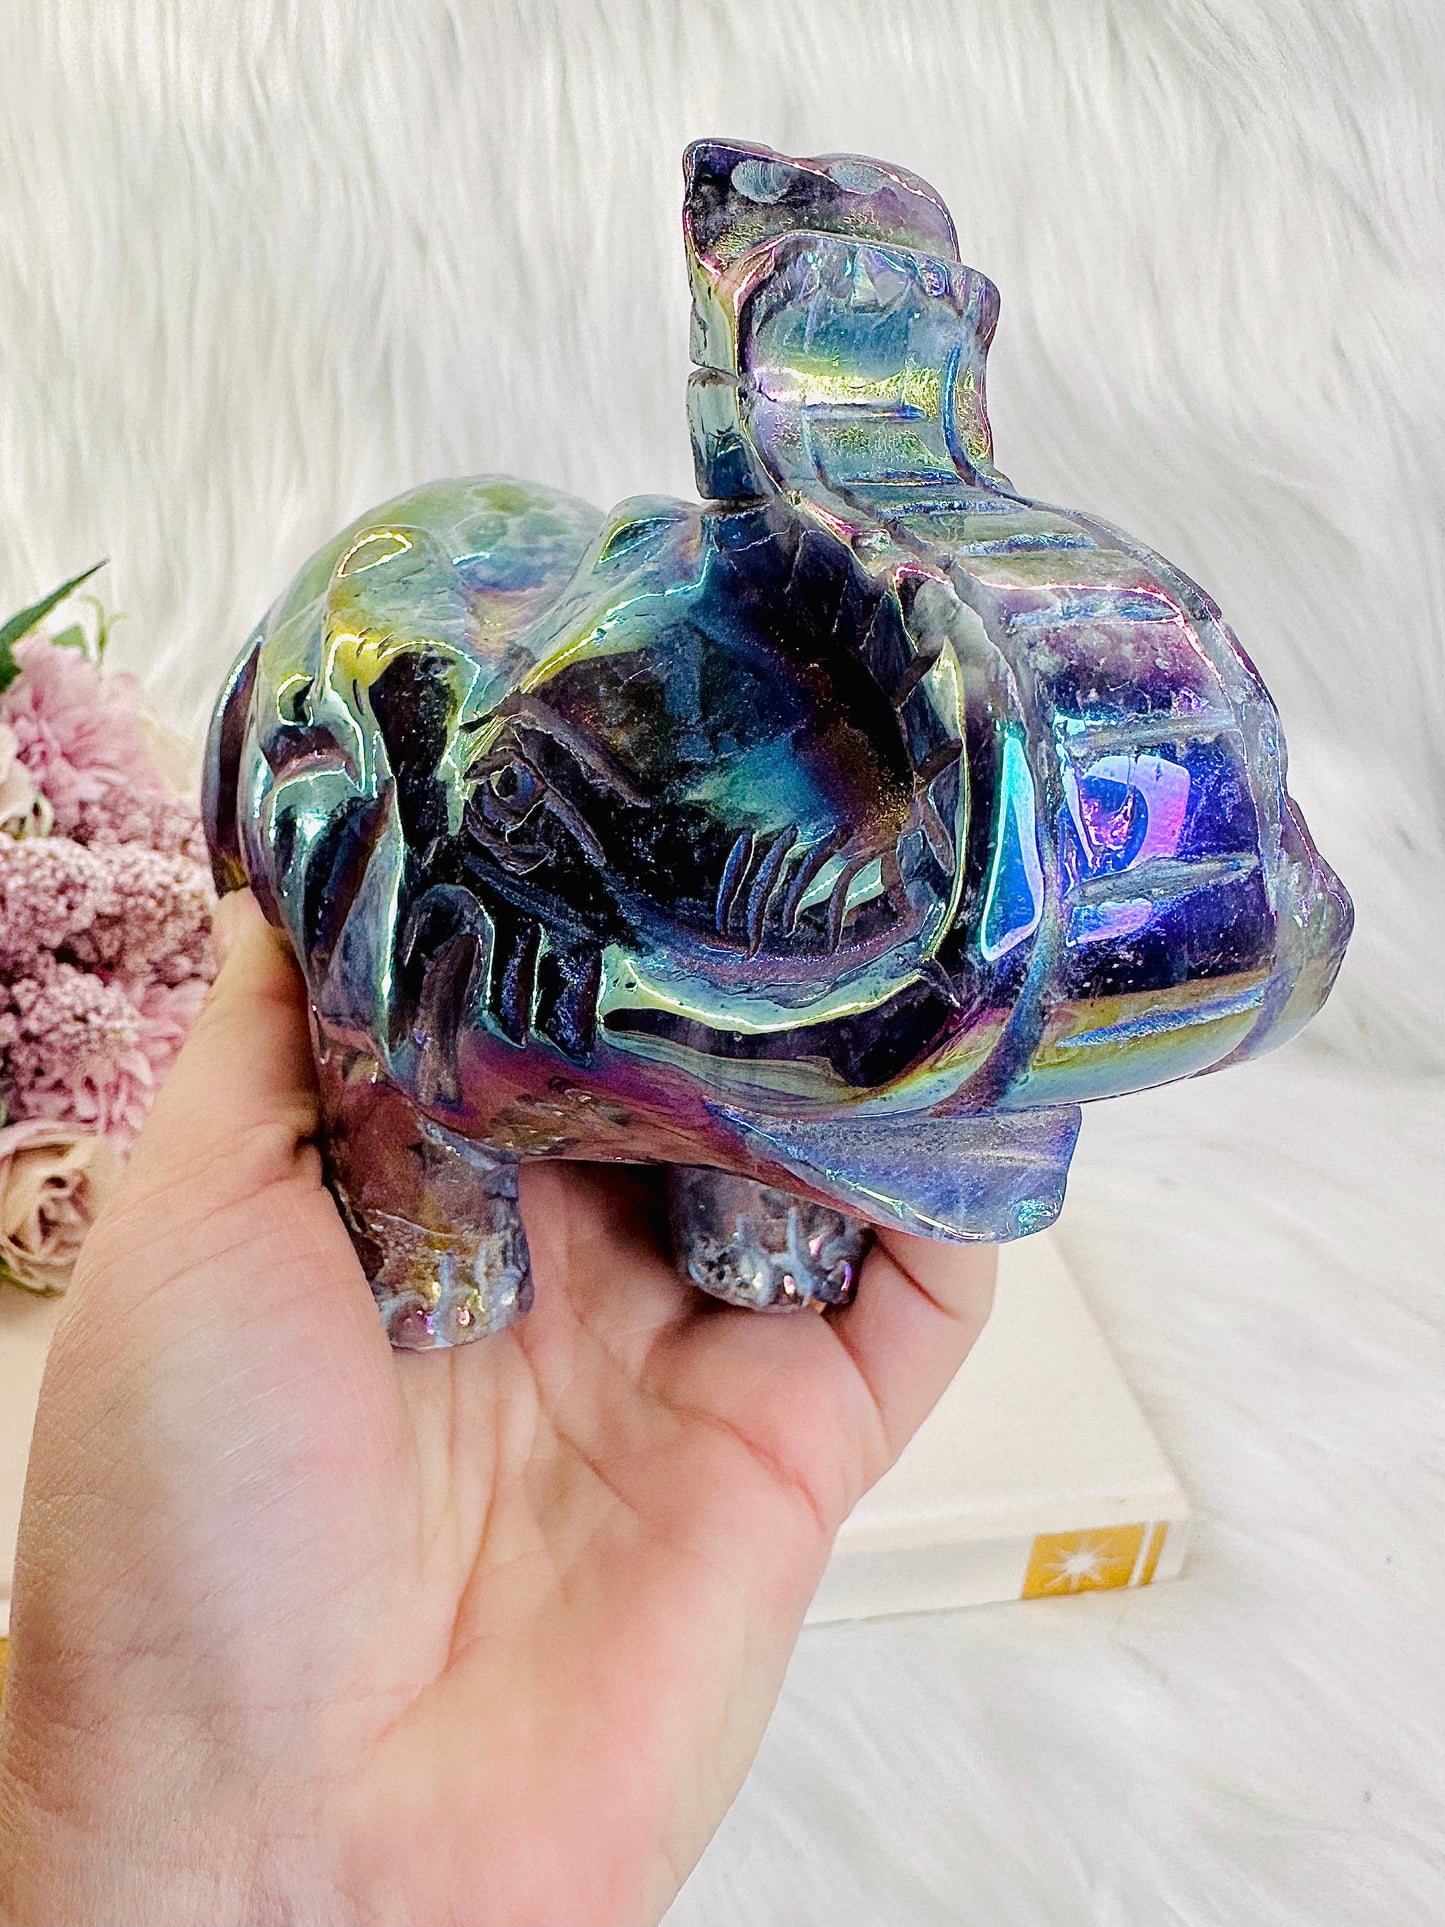 ⚜️ SALE ⚜️Fabulous Statement Piece !!!! Stunning Huge 1.34KG Chunky Angel Aura Dream Amethyst Elephant Carved To Perfection